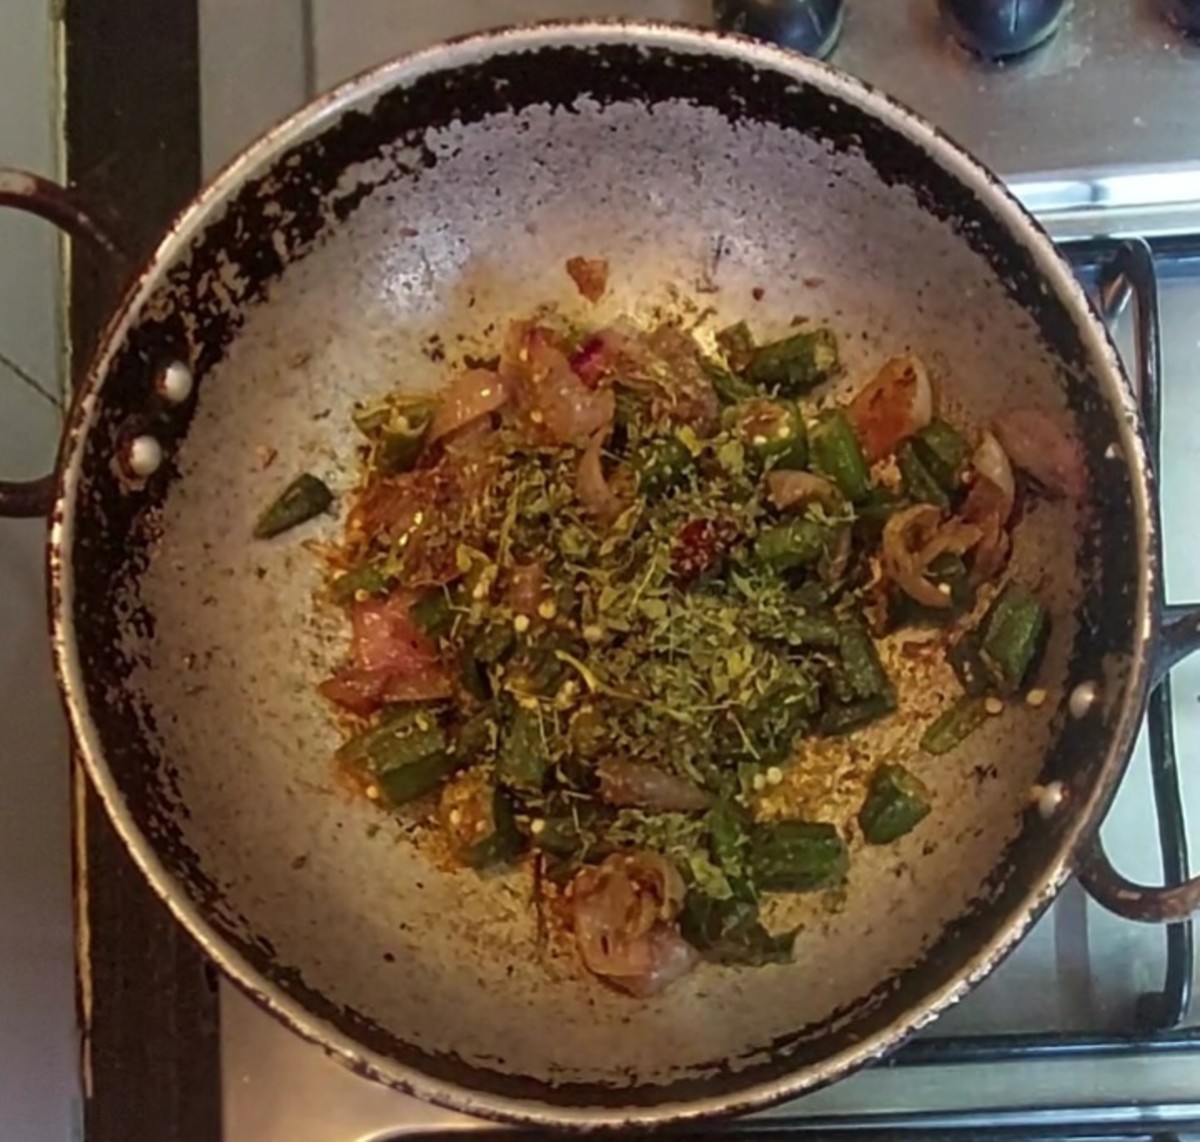 Add 1 teaspoon crushed kasuri methi, mix well and switch off the flame.